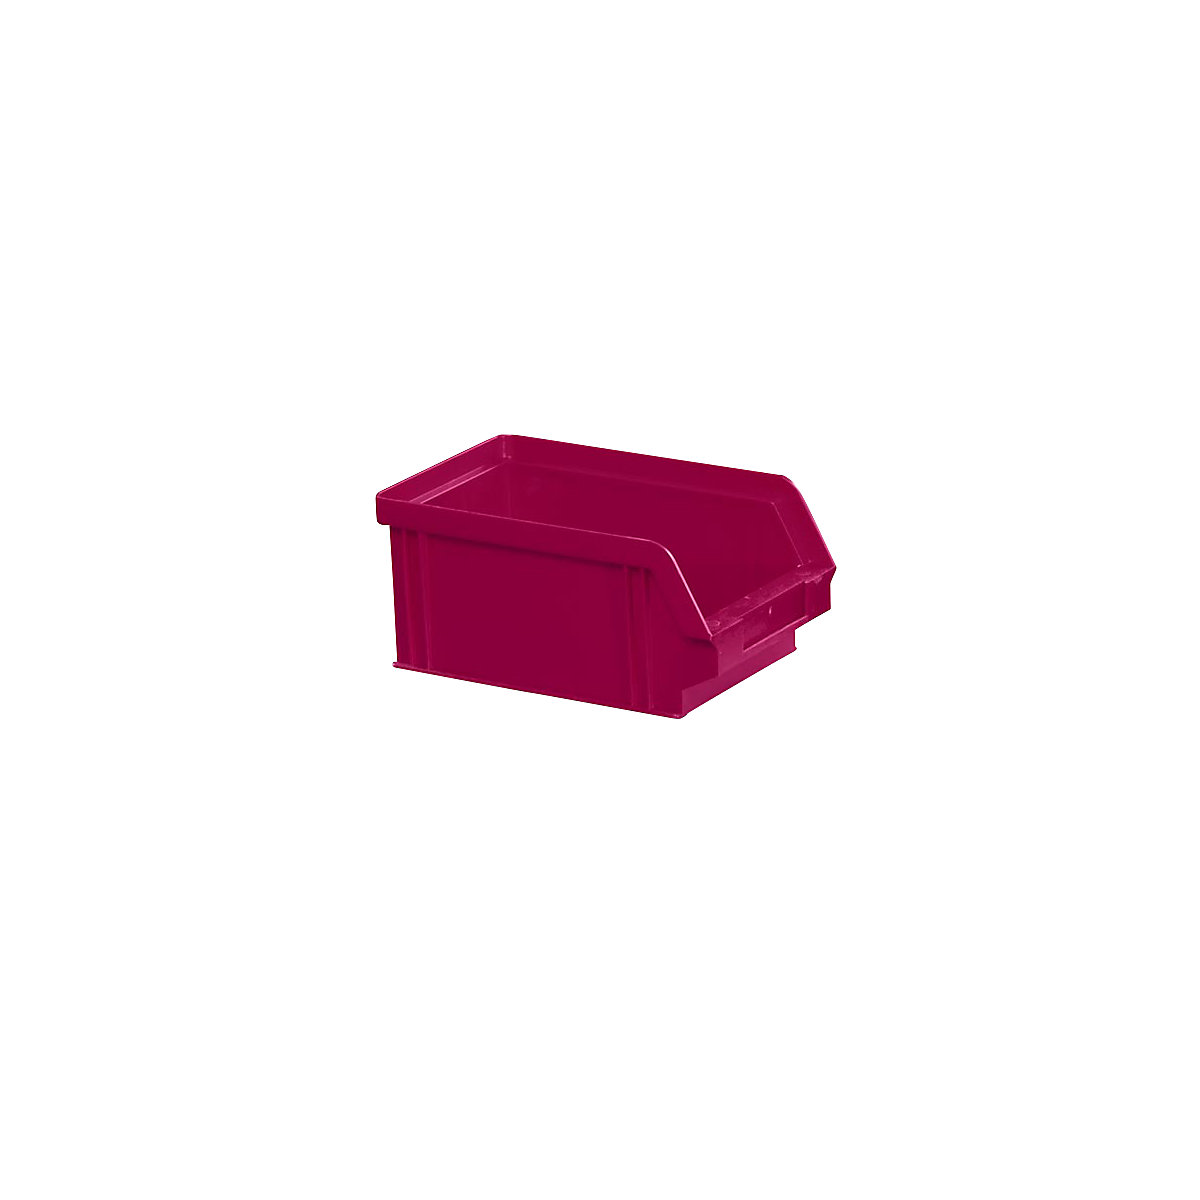 Open fronted storage bin made of polystyrene, LxWxH 160 x 102 x 75 mm, pack of 32, red-6